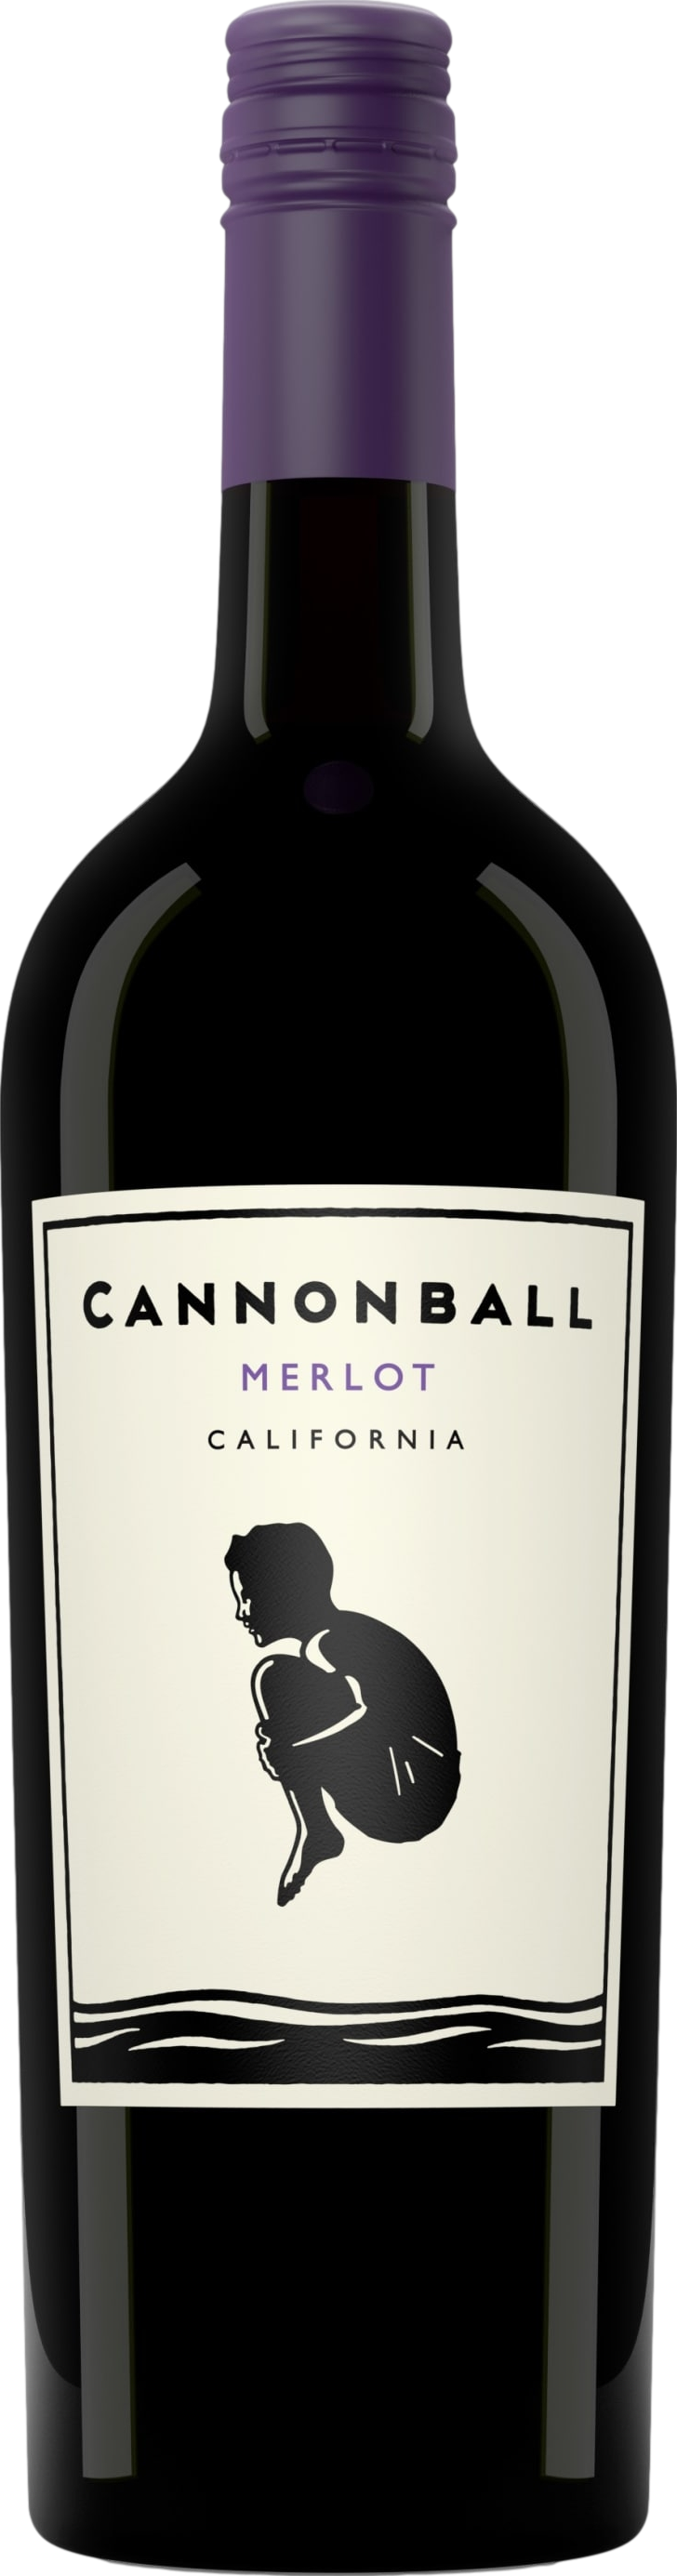 Cannonball Merlot 2019 Cannonball 8wines DACH